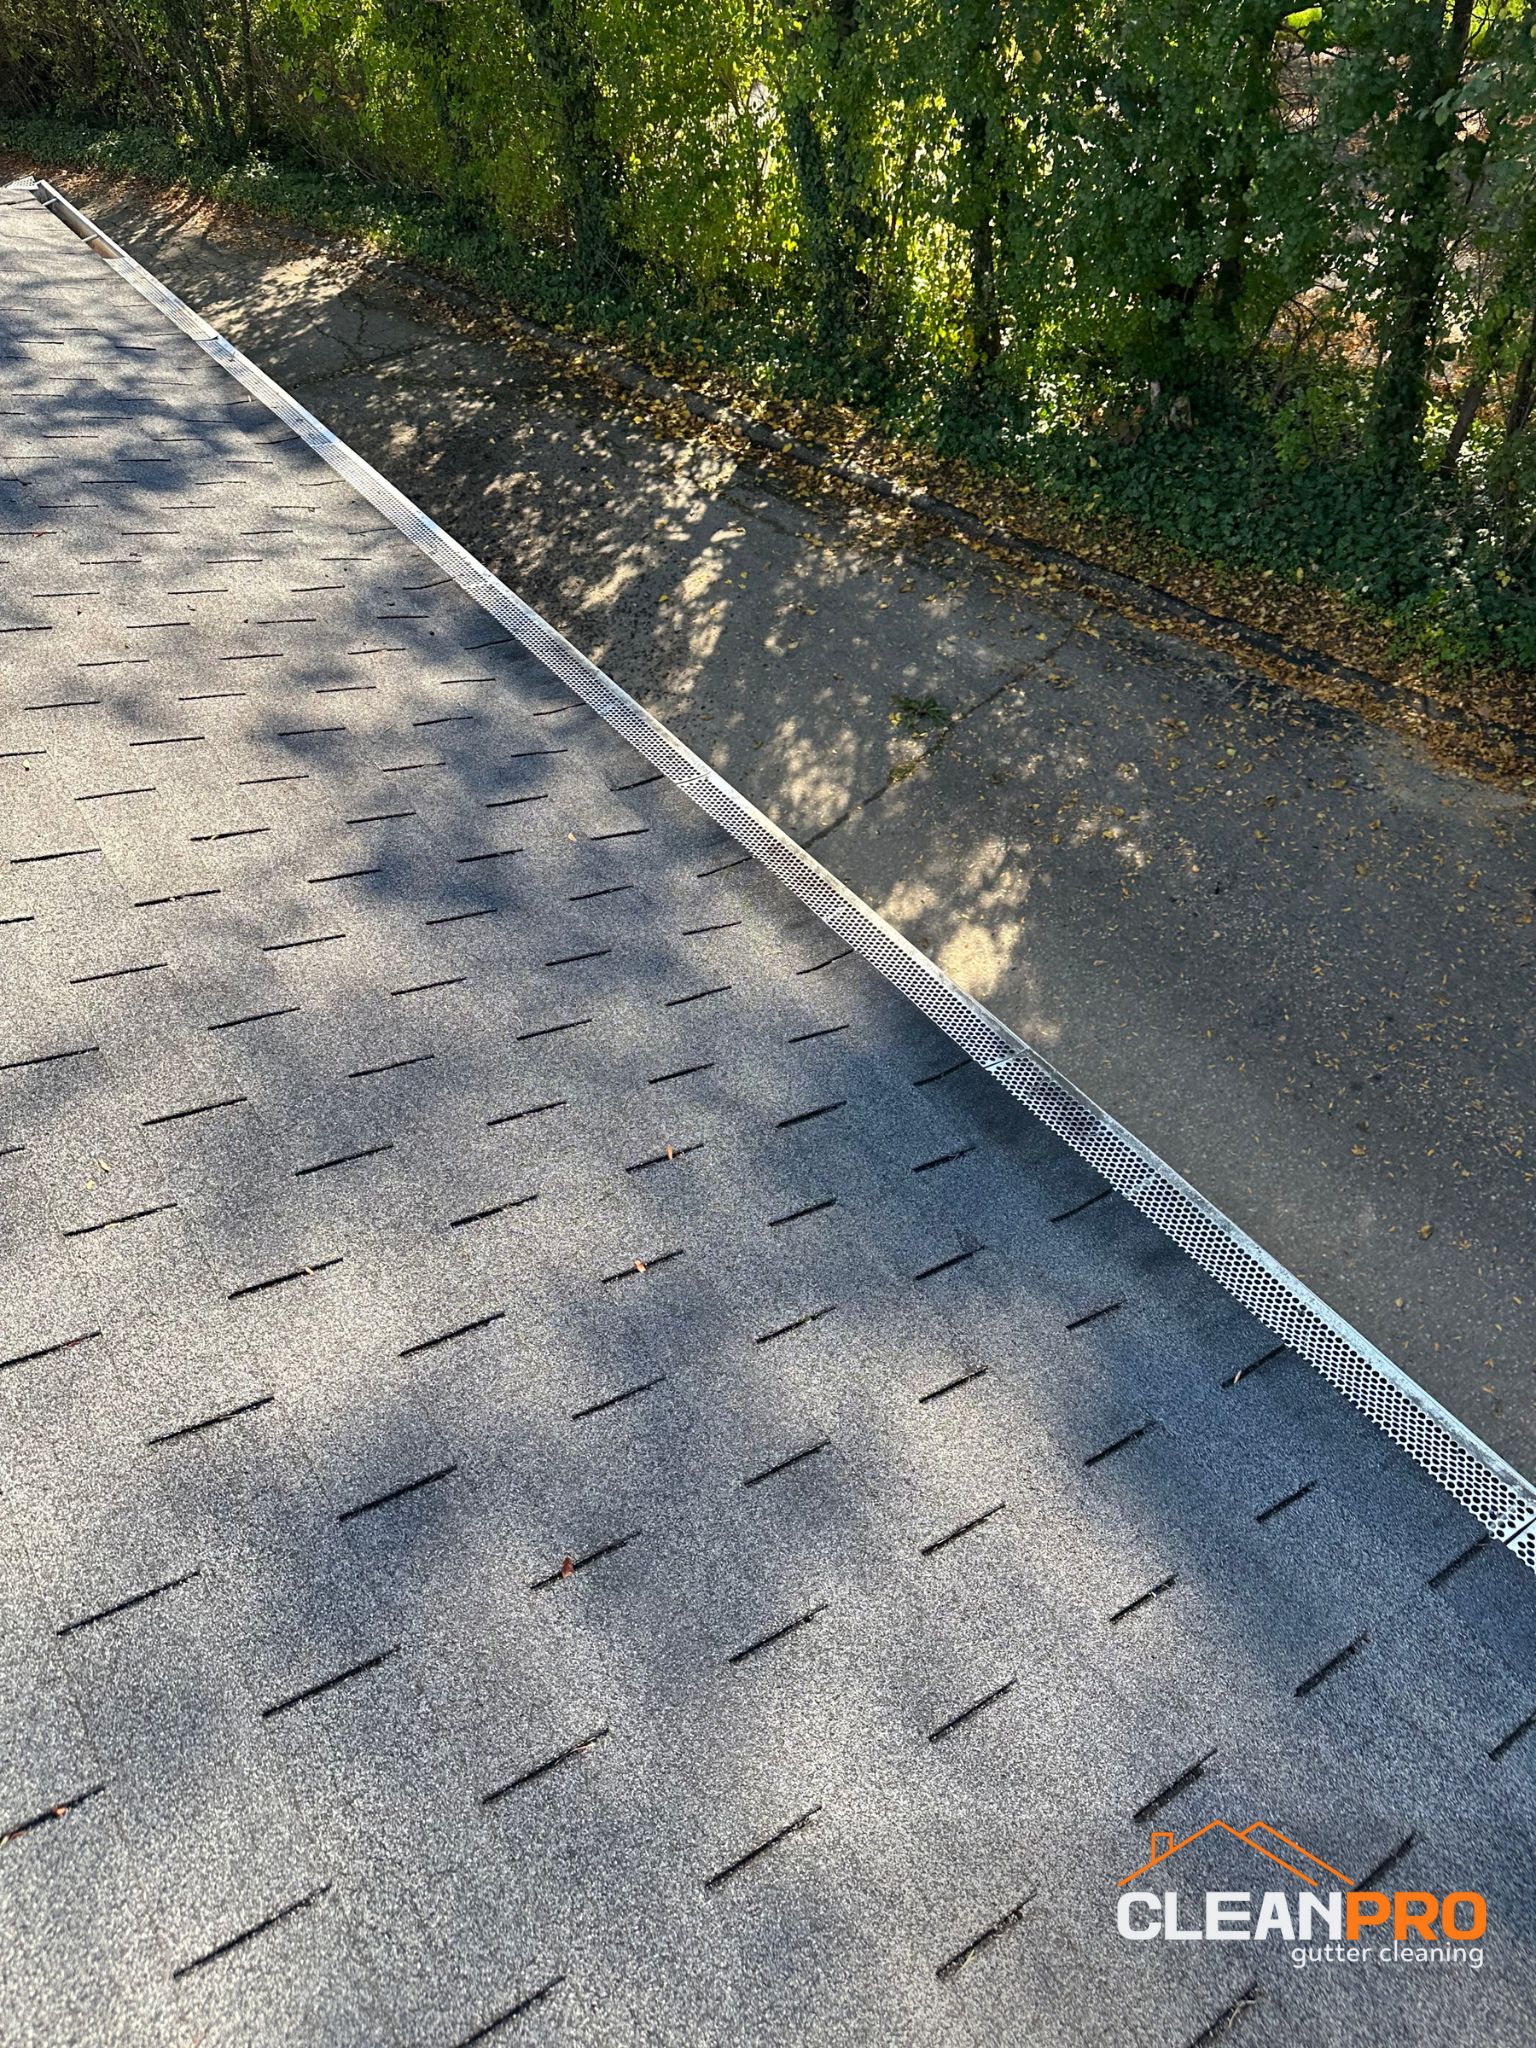 Quality Gutter Cleaning in Baltimore MD